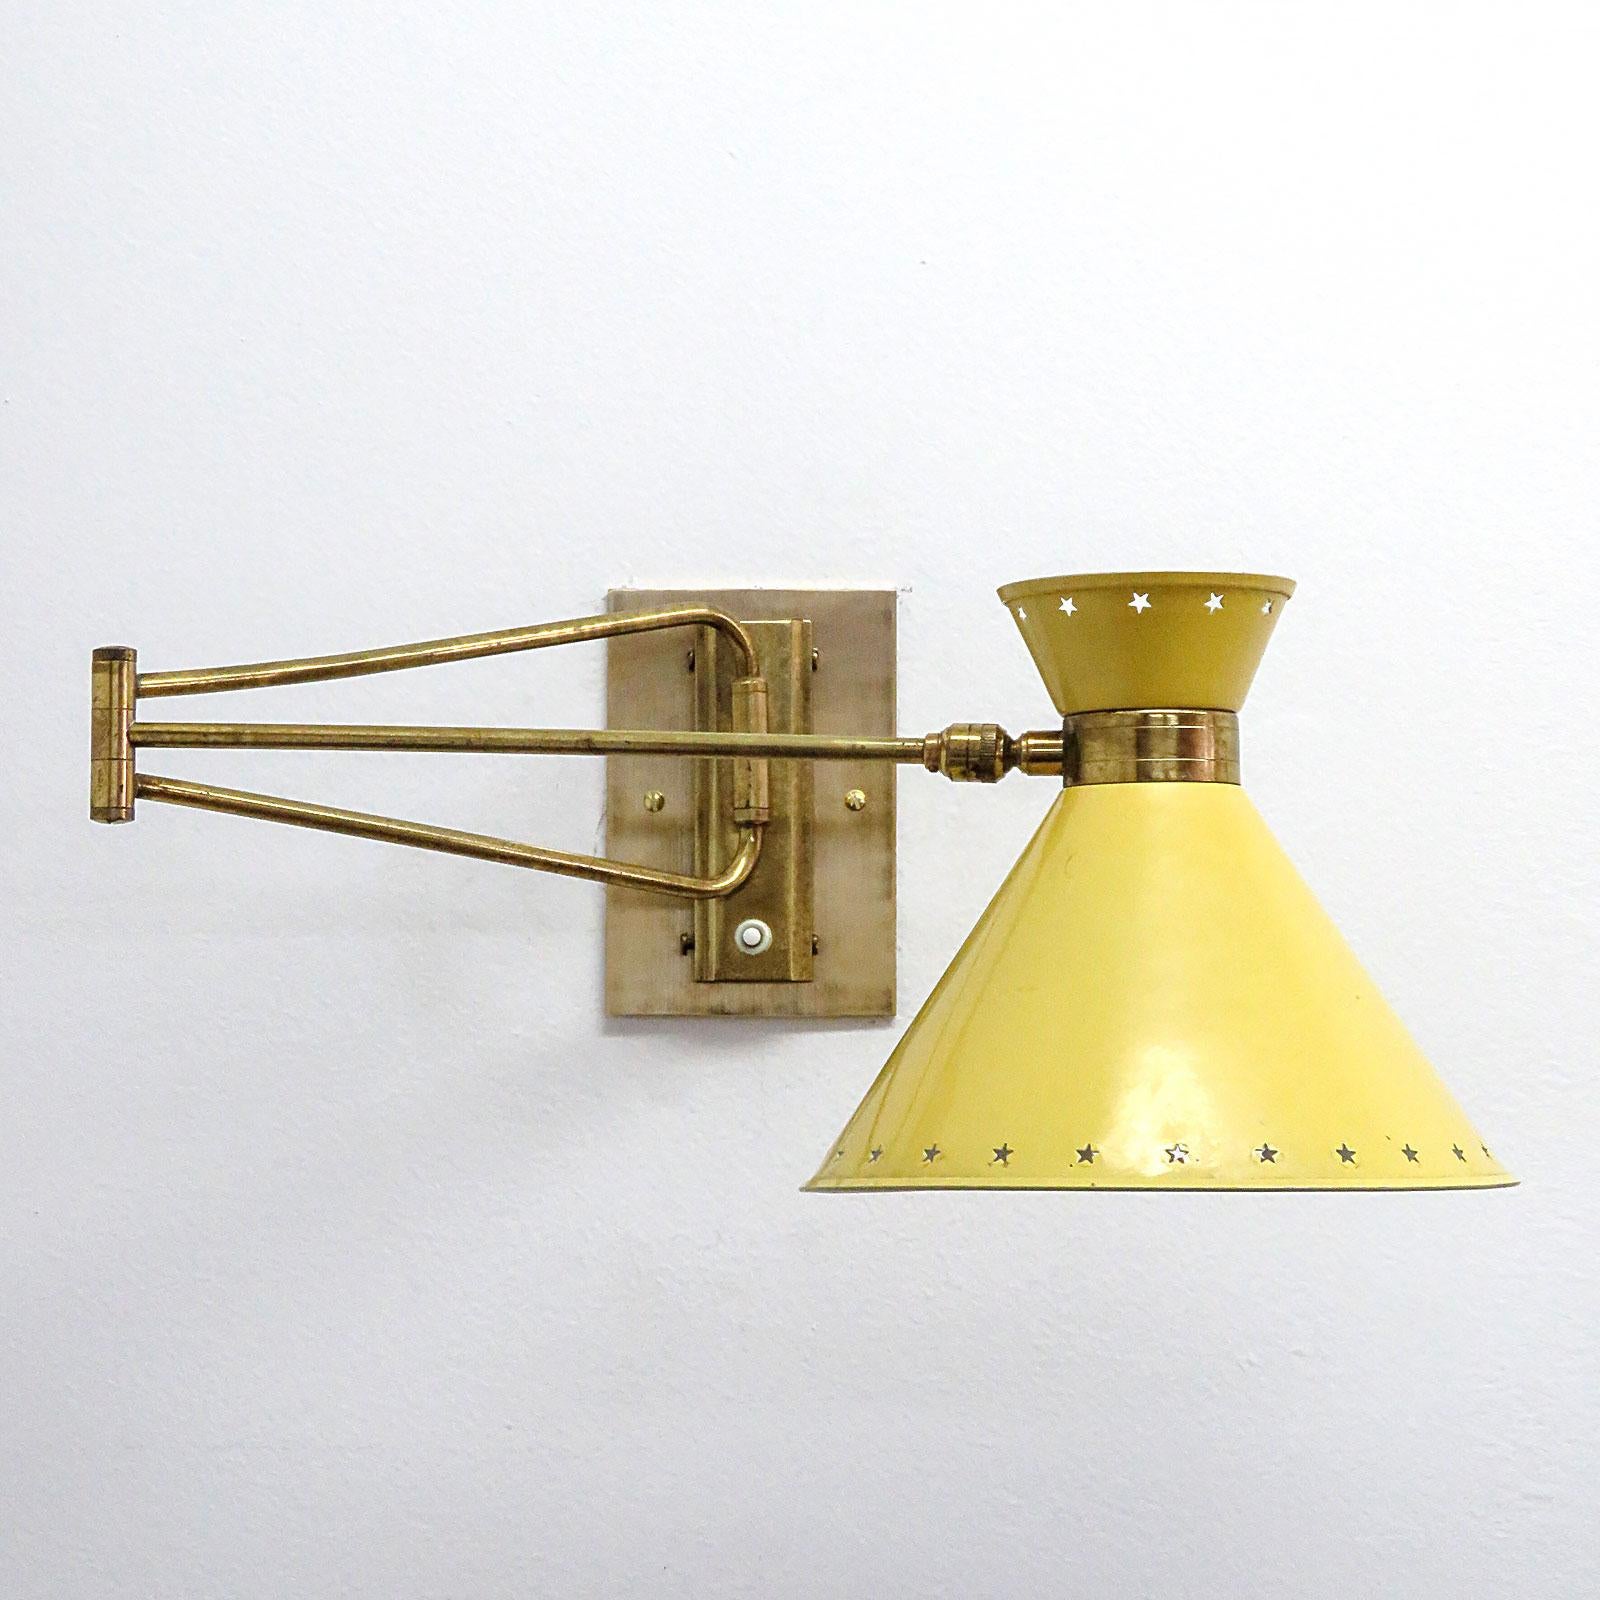 Wonderful double cone swing arm wall light by Rene Mathieu for Lunel, France 1950, original yellow colored enameled metal shade with decorative star perforations on an articulate brass arm and custom brass backplates, wired for US standards, one E12